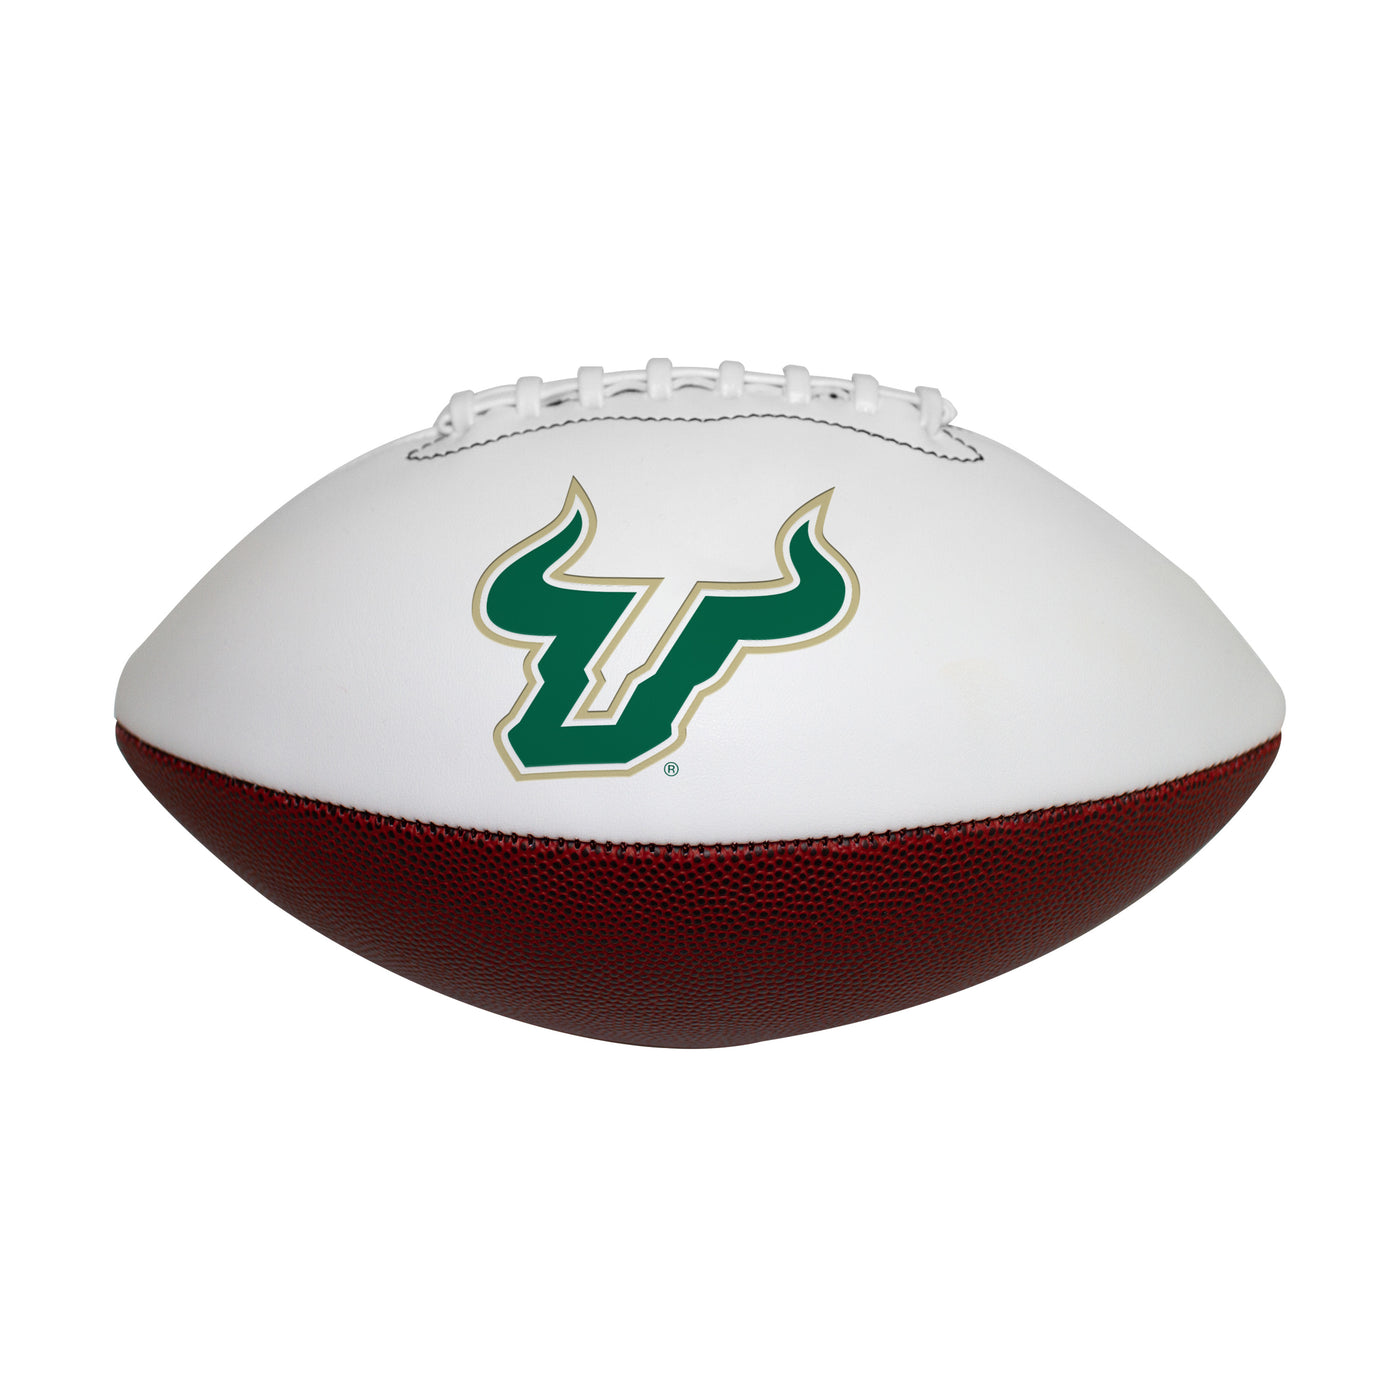 South Florida Official-Size Autograph Football